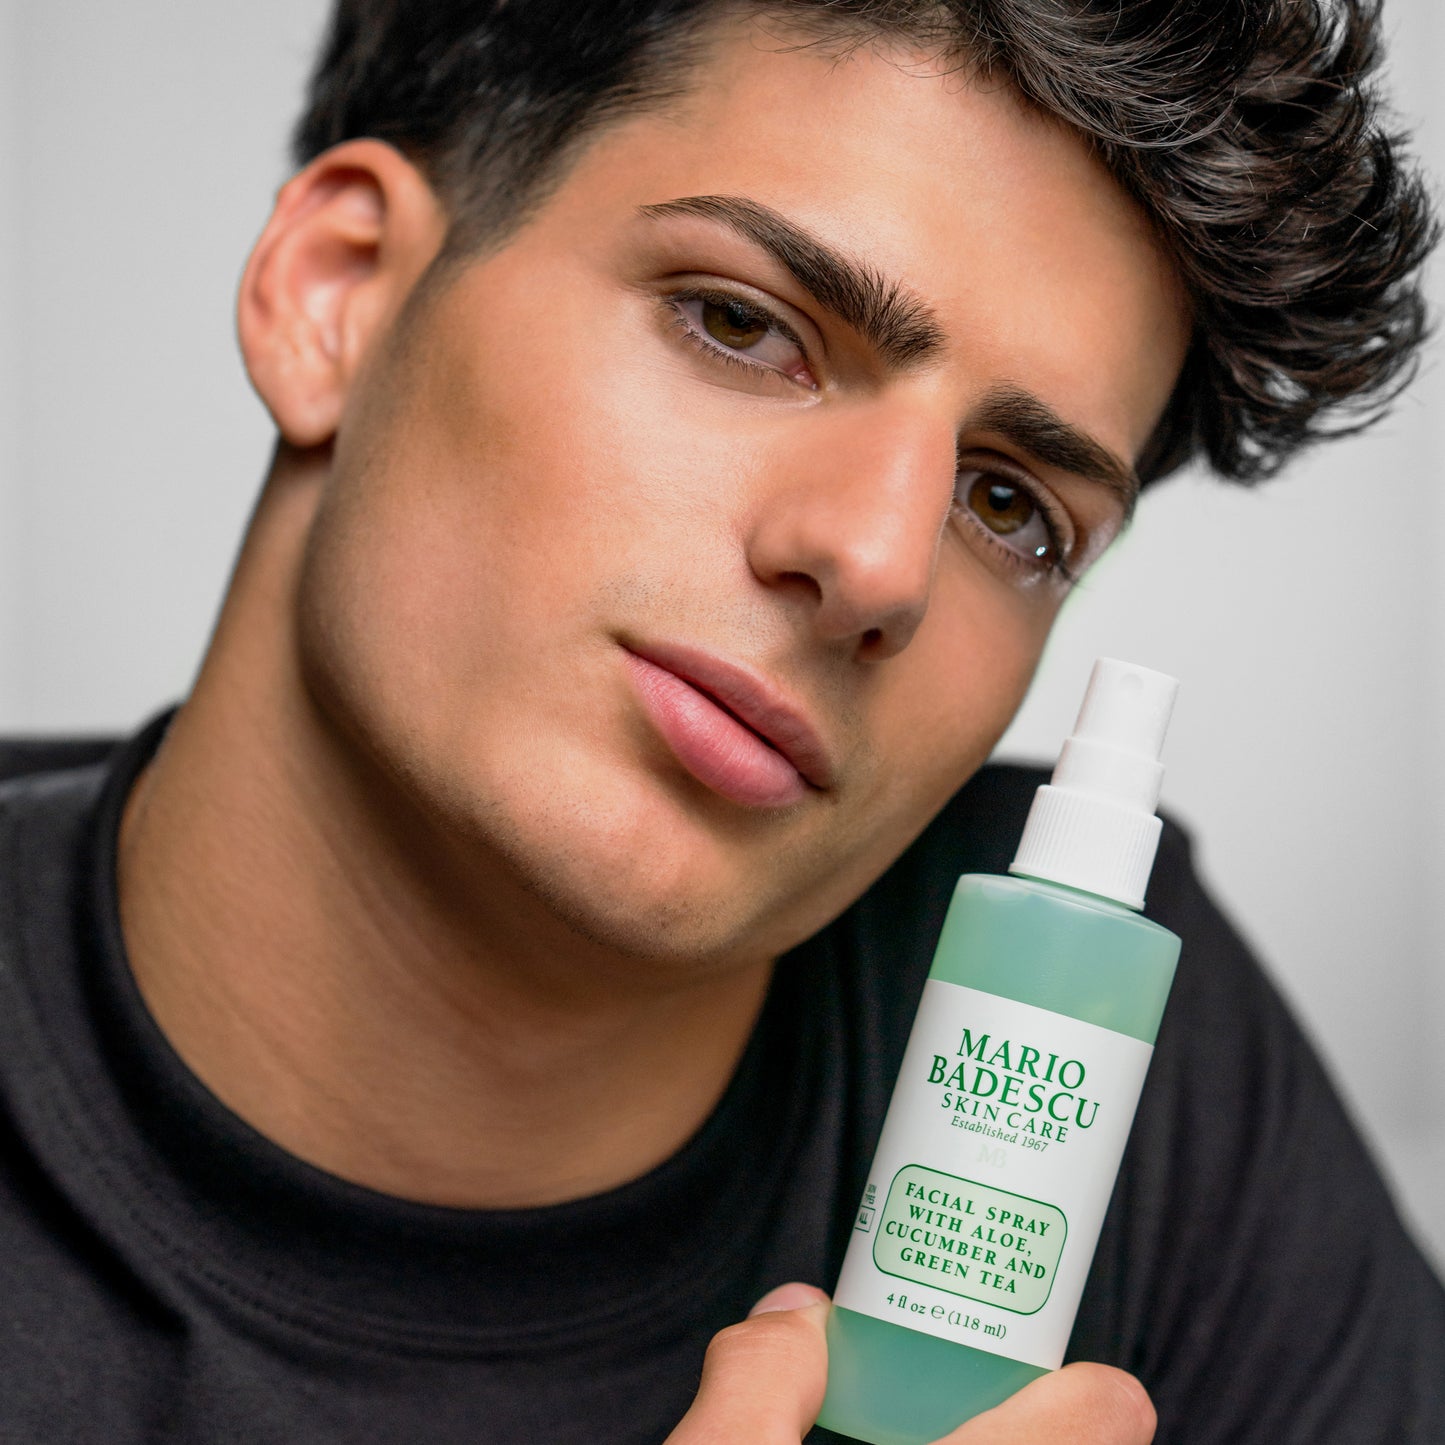 Man with glowing skin holding Facial Spray With Aloe, Cucumber, Green Tea